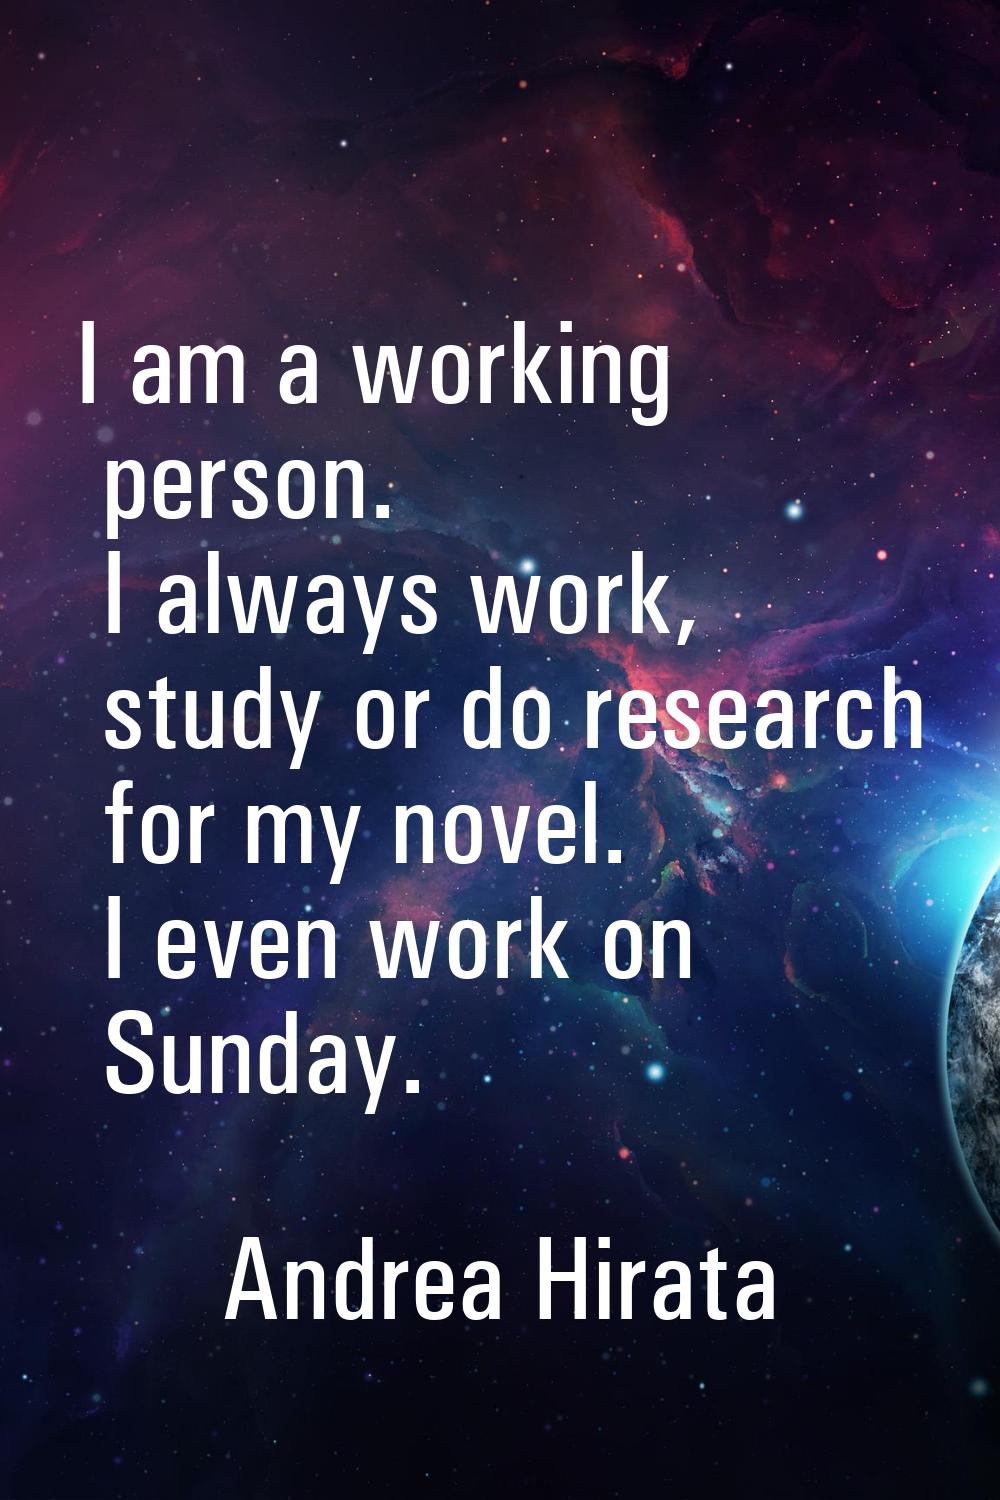 I am a working person. I always work, study or do research for my novel. I even work on Sunday.